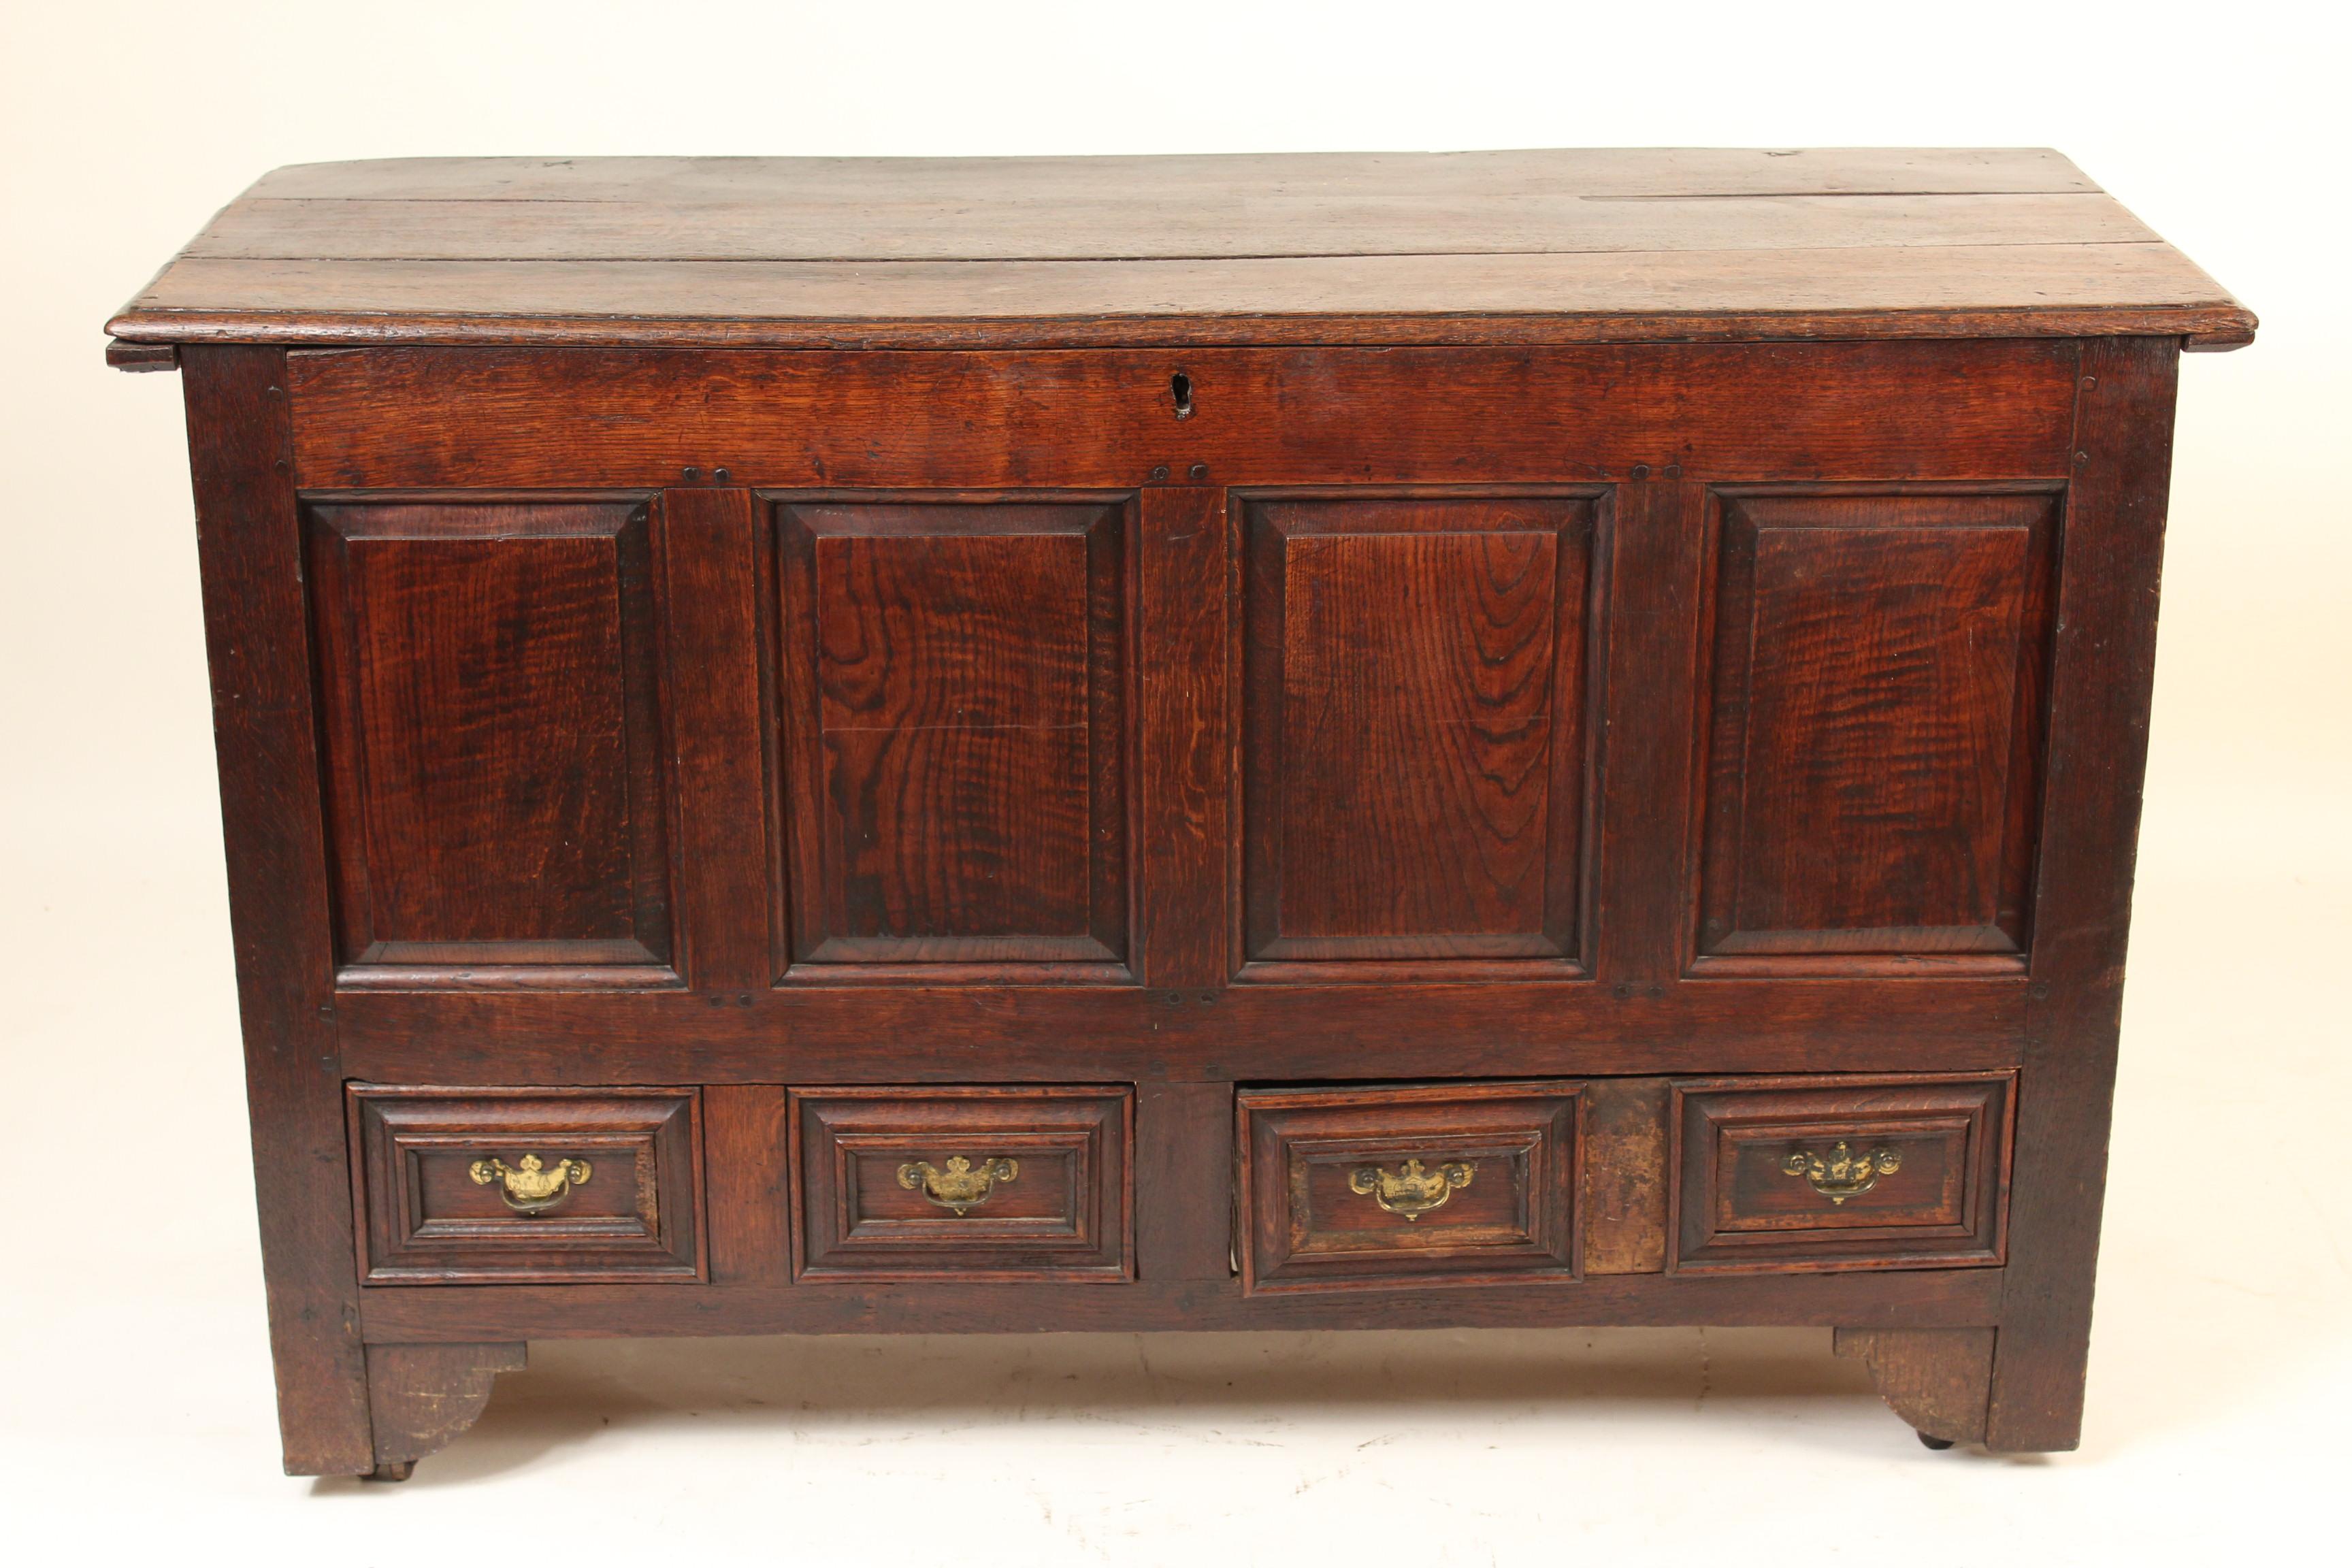 Antique George II style English oak mule chest, early 19th century. The top lifts up for storage and there are two bottom drawers. This mule chest has excellent old original color. It has ample storage, can be used as a sideboard or large trunk.